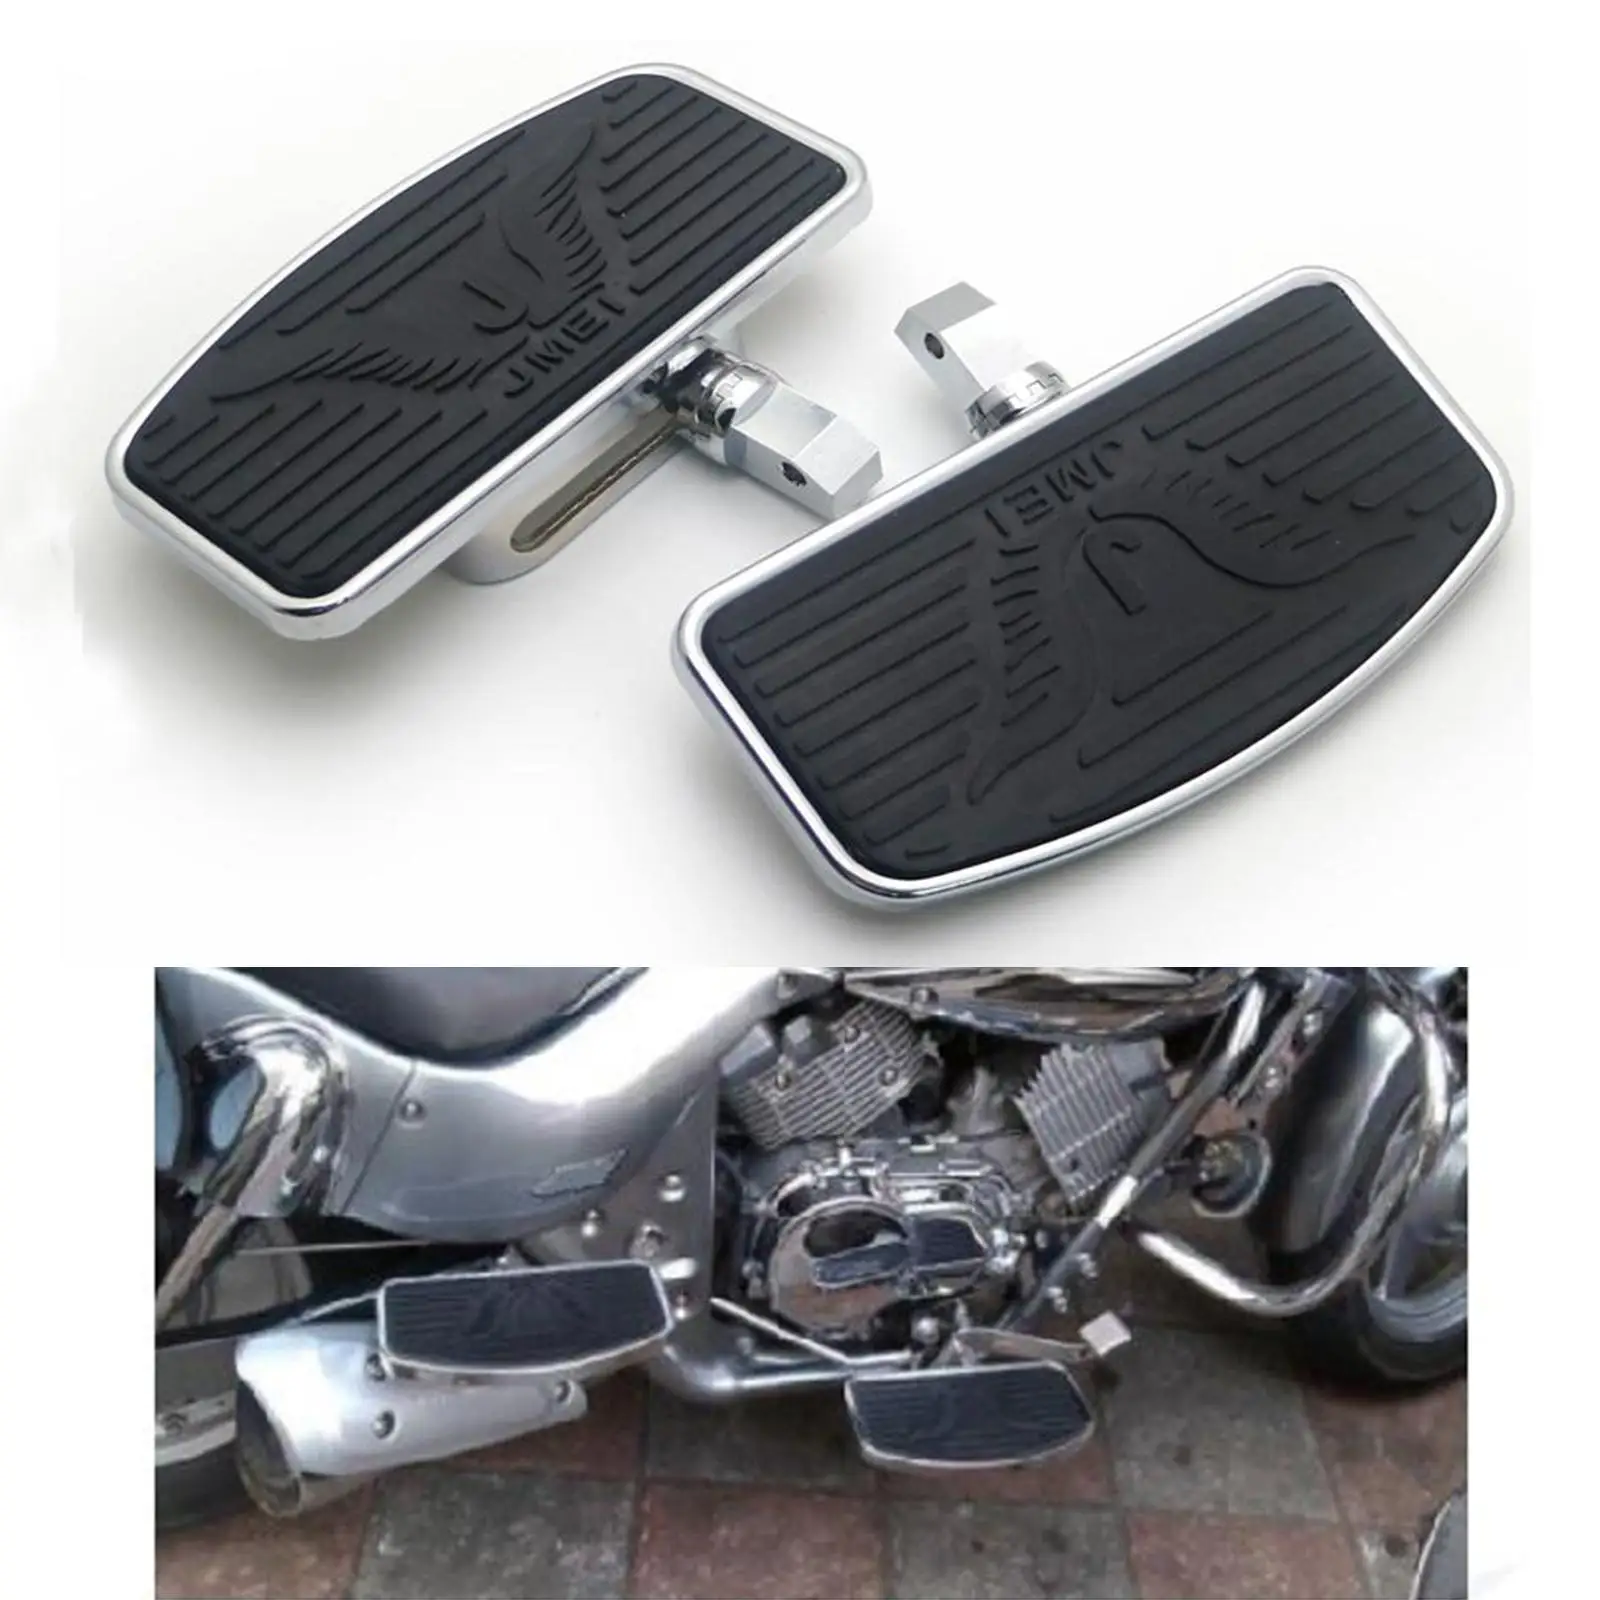 1 Pair Footboard Foot Pegs Floorboards Footrest for SUZUKI VL400 VL800 Black, Direct replacement,easy to install.